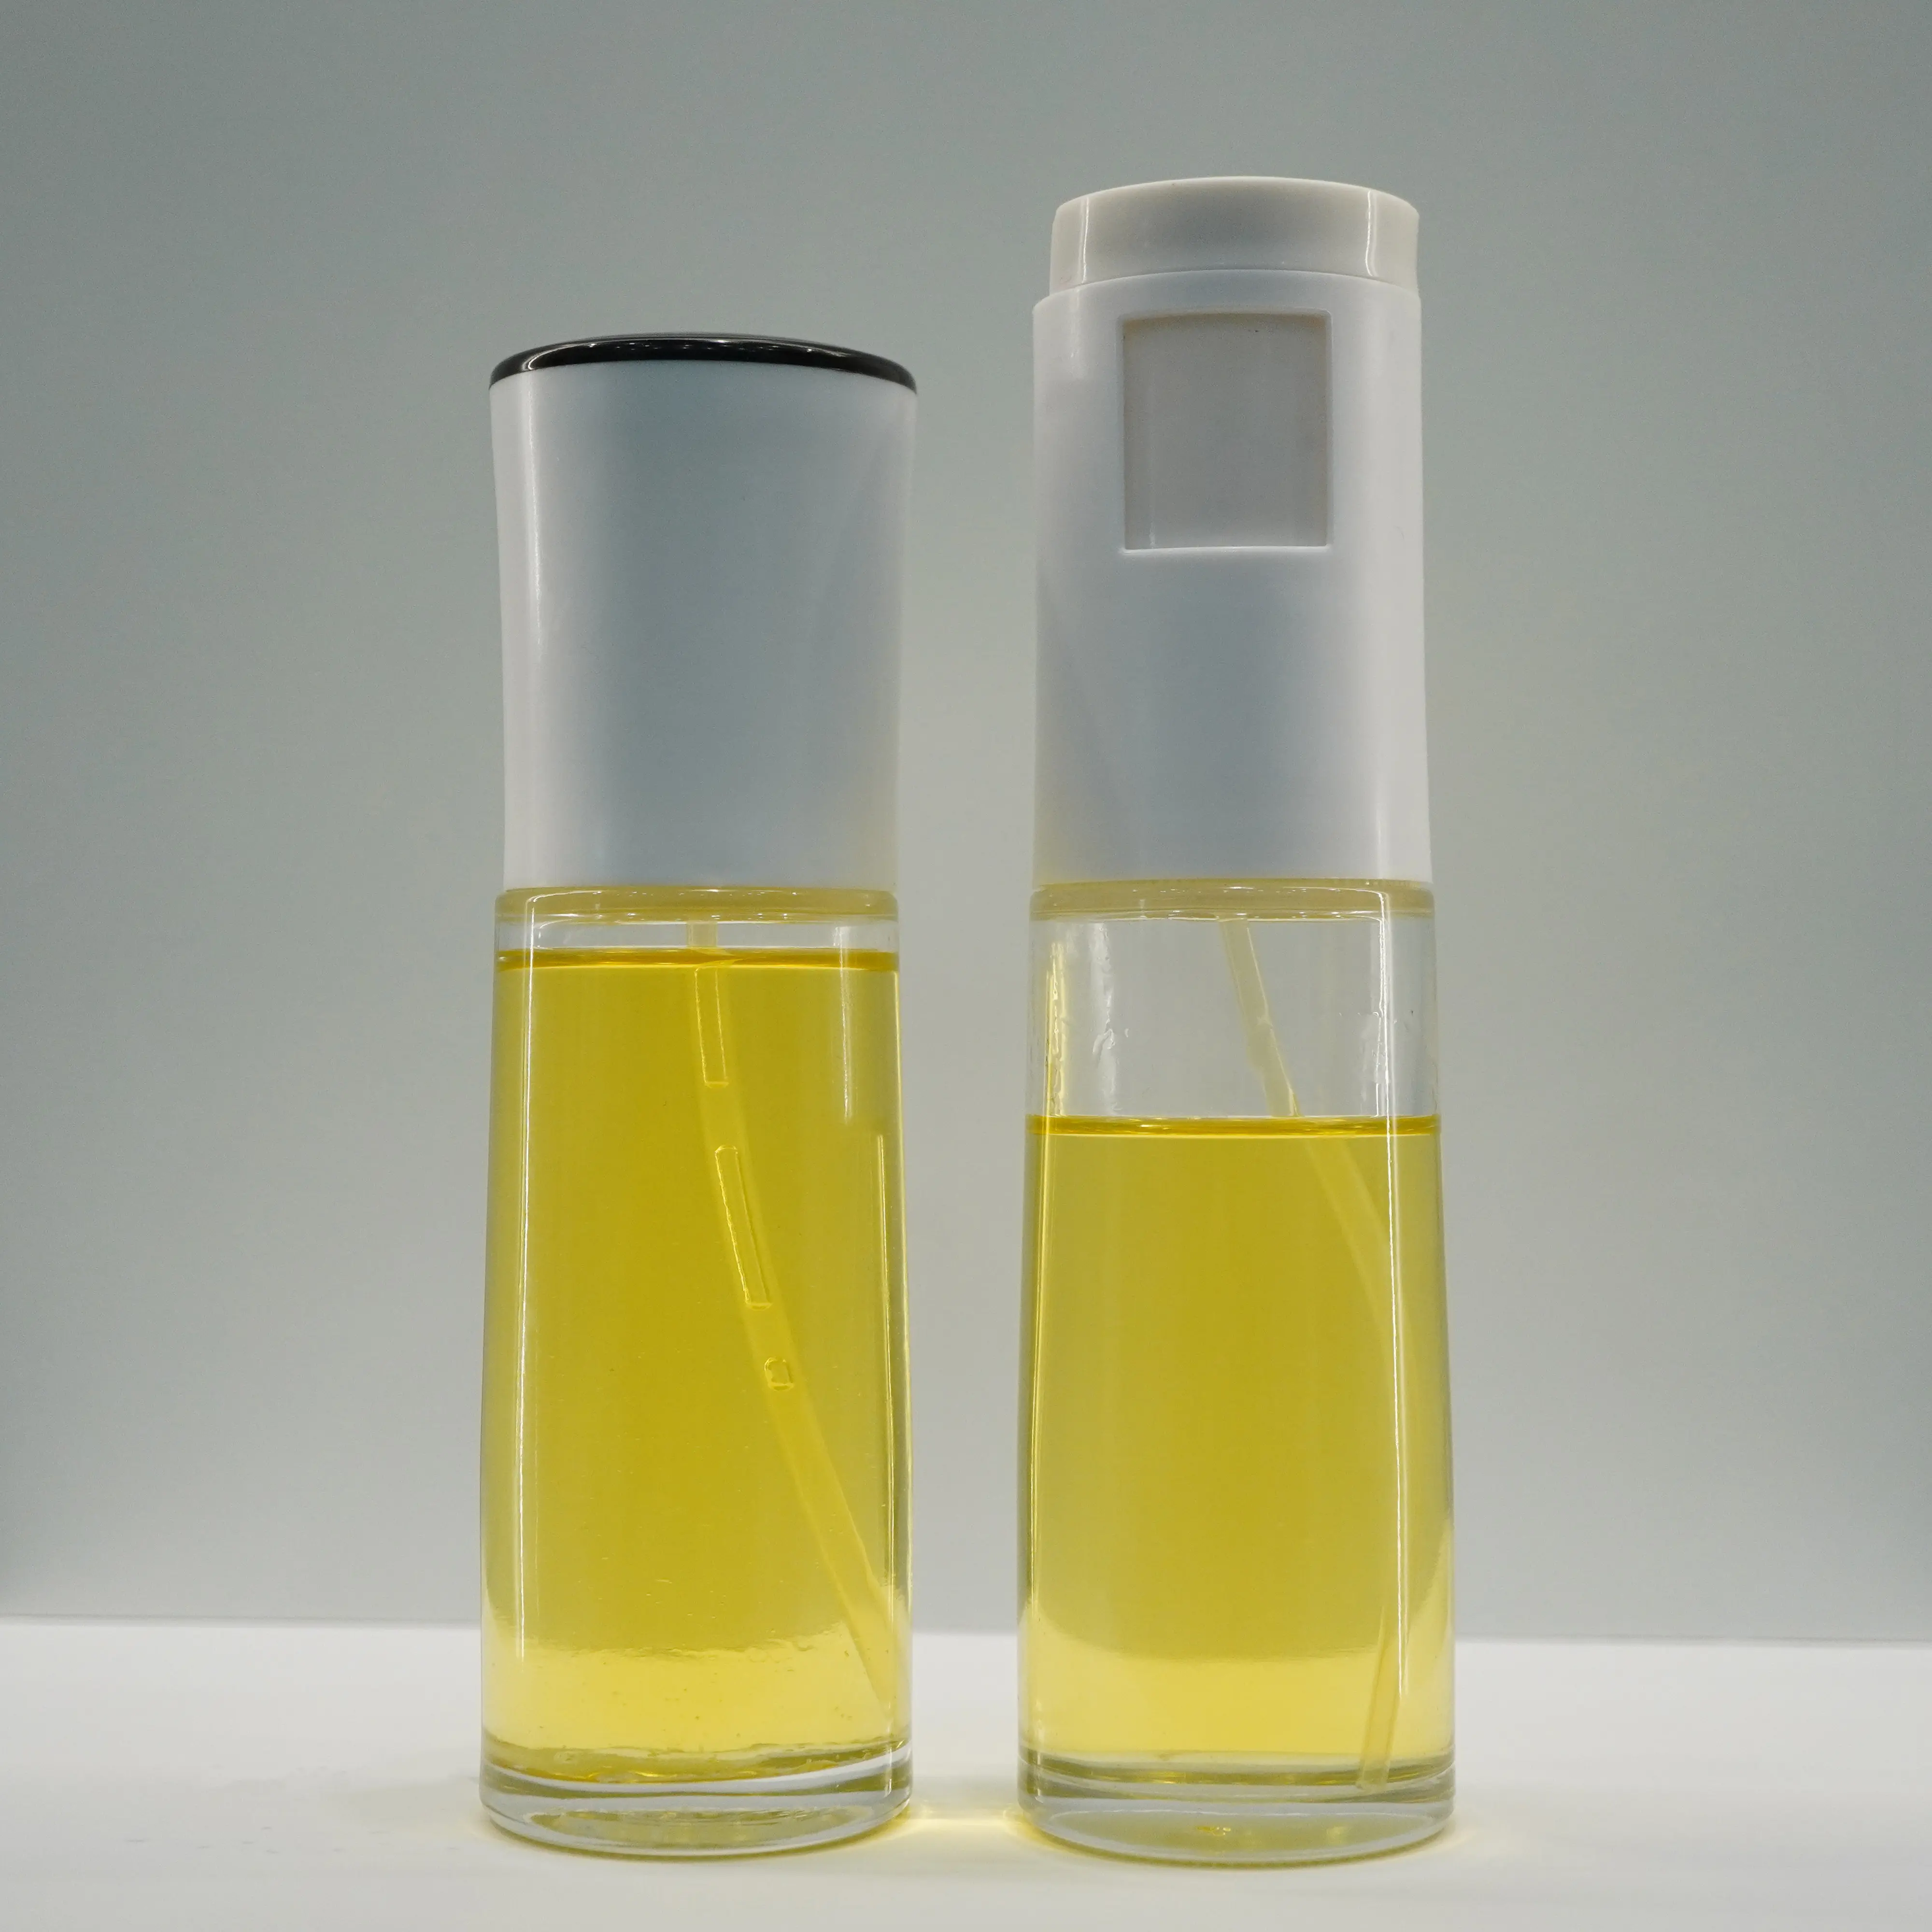 High Quality Oil Spray Bottle With Measurements Spray Oil Empty Glass Bottle 120ml Kitchen Cooking